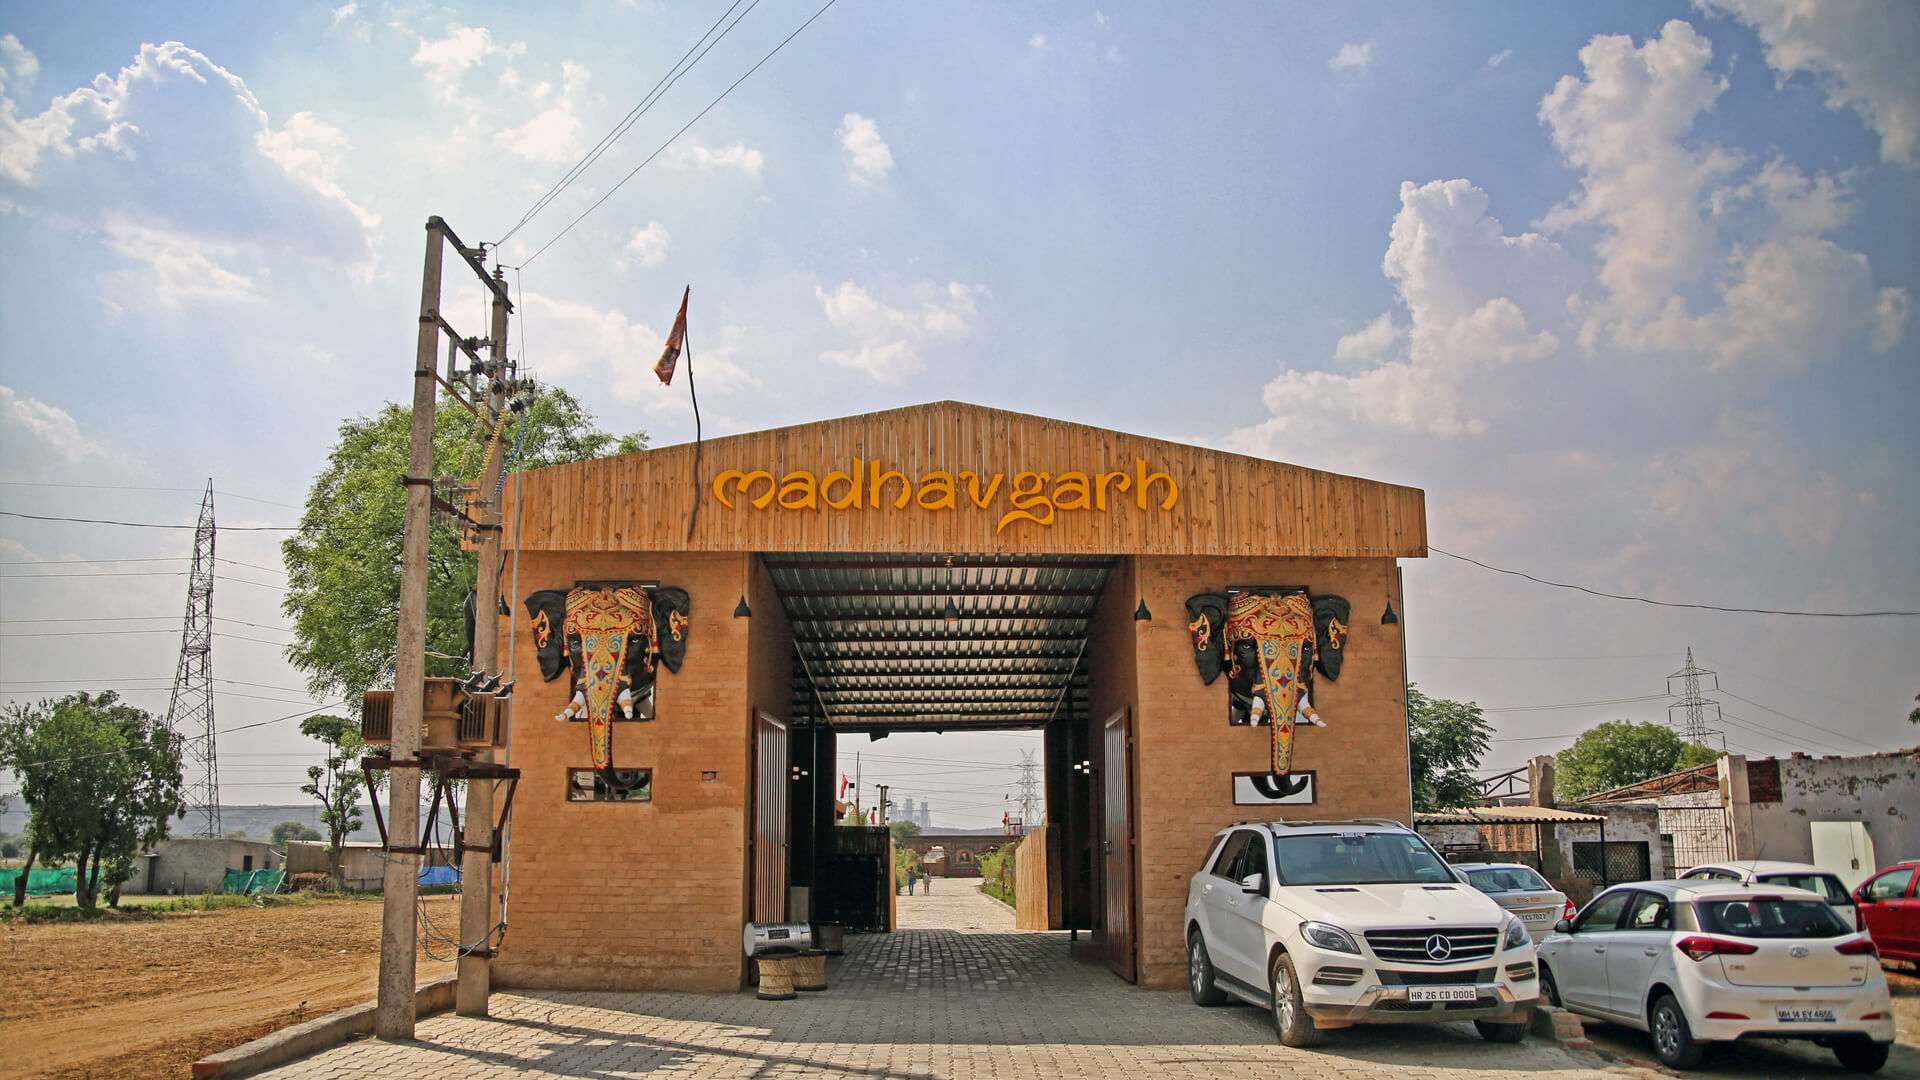  Find The Best Coupon For a Discount at Madhavgarh Farms